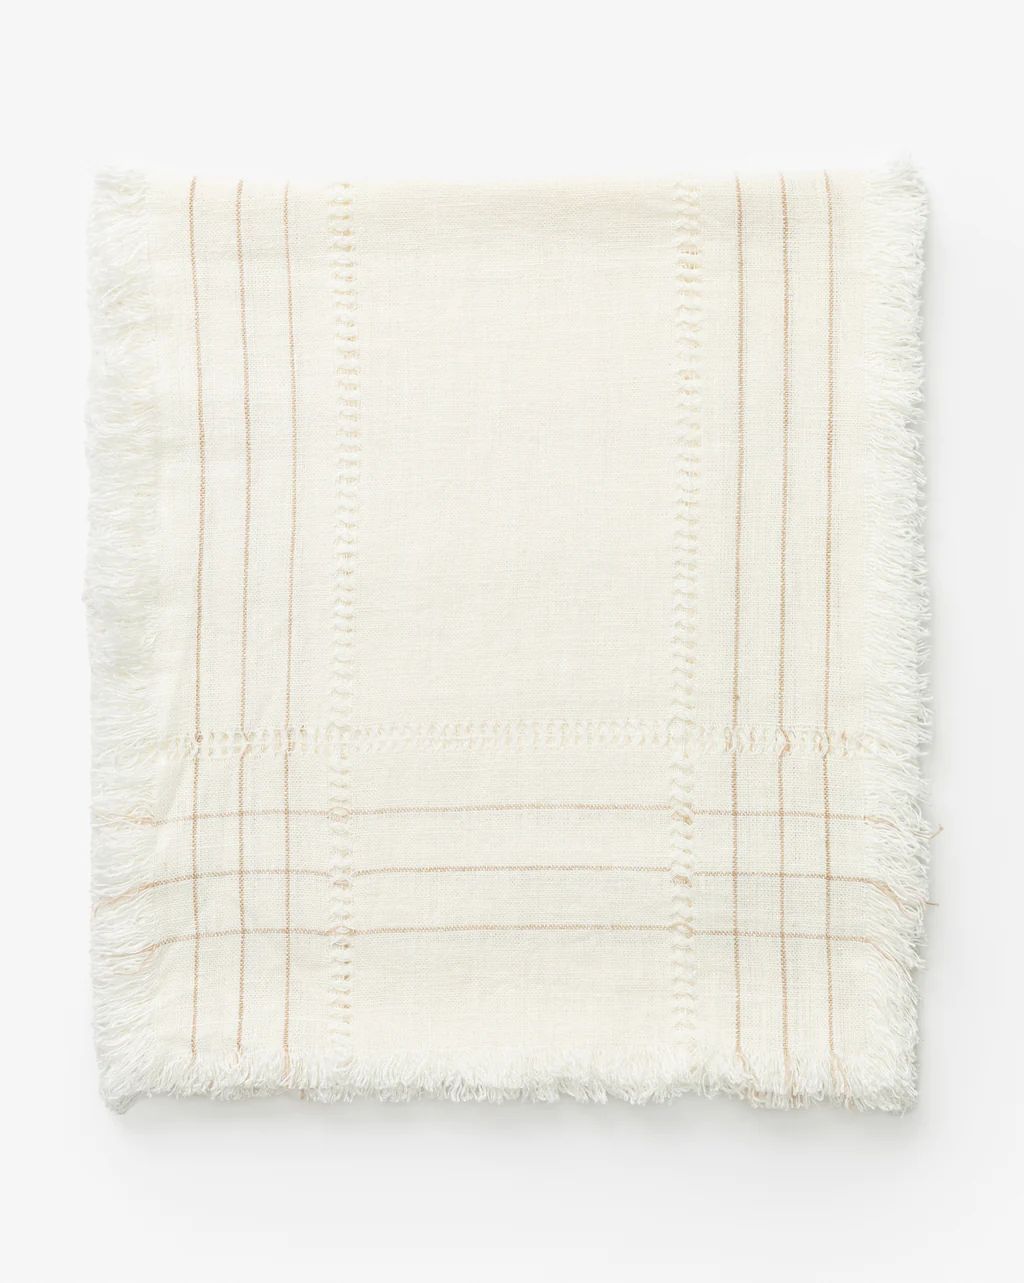 Woven Table Runner | McGee & Co.